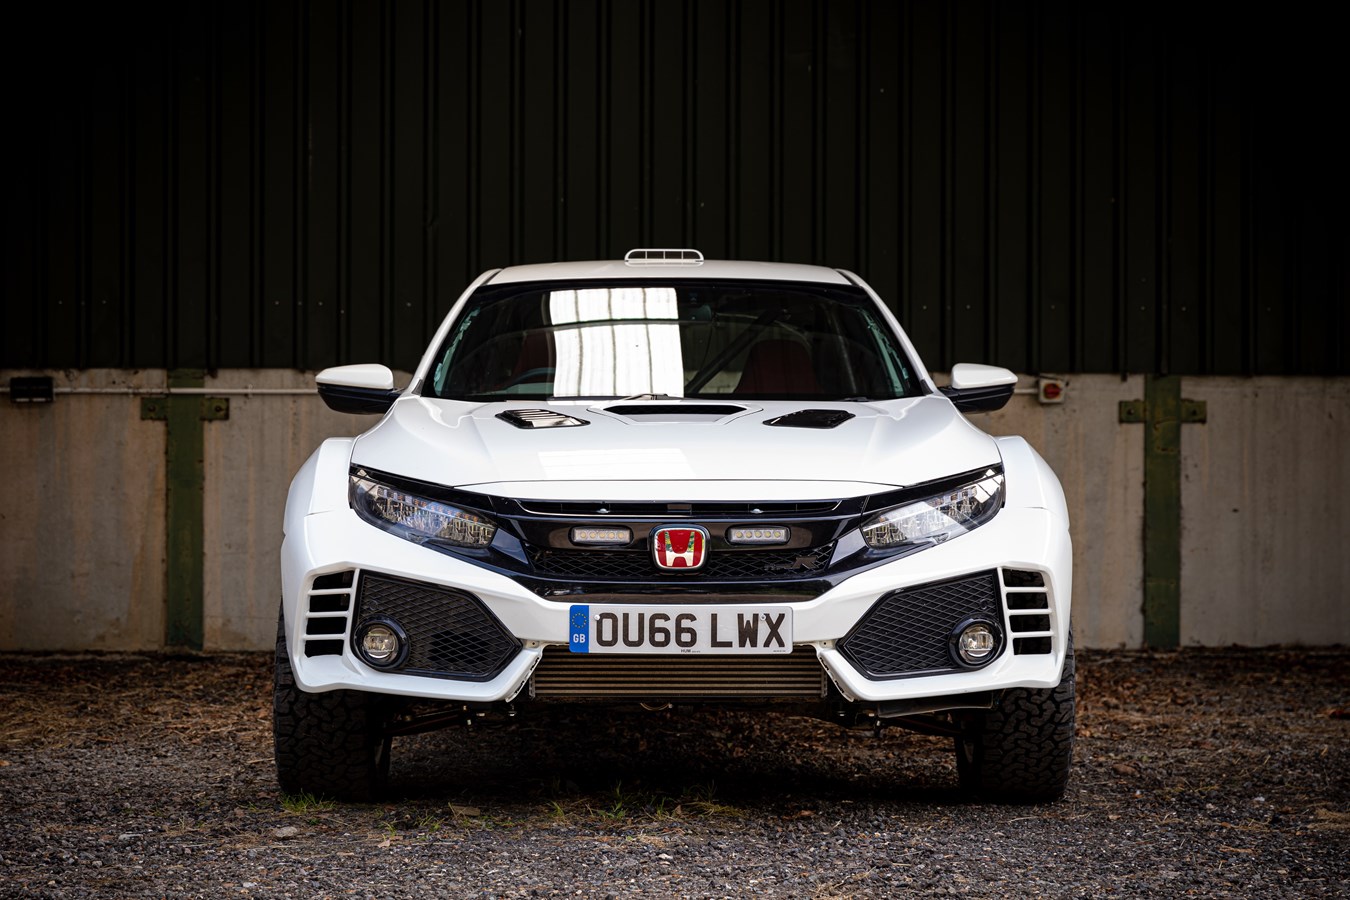 The new Civic Type R Concept